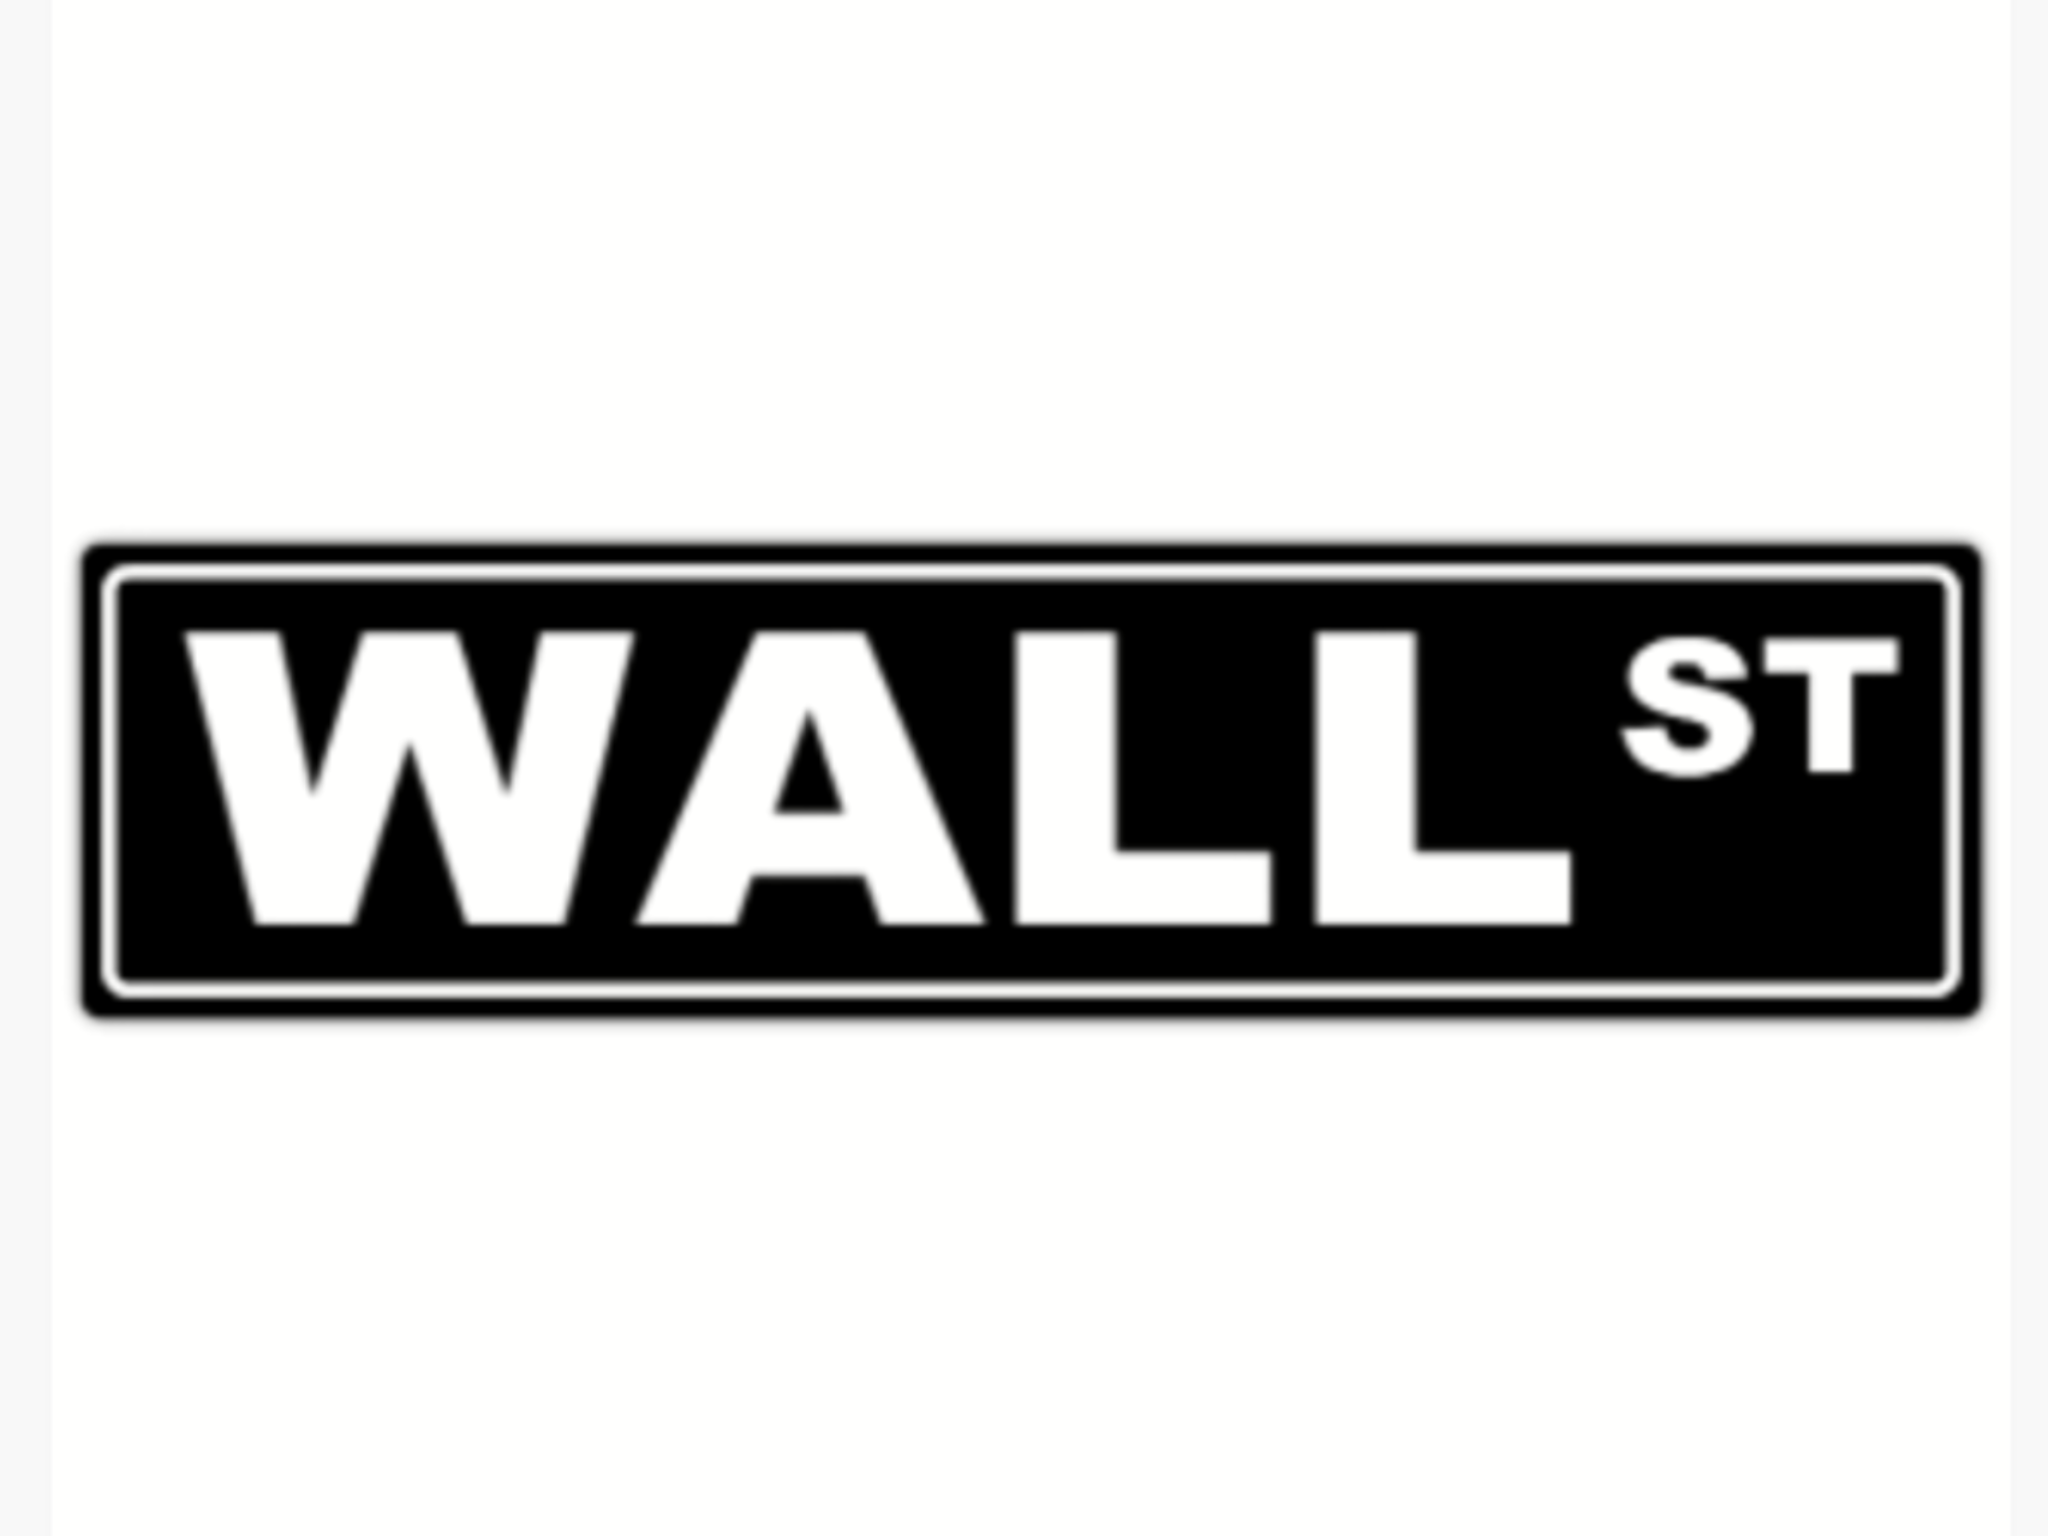 EVERY POLITICIAN IS ULTIMATELY WORKING FOR WALL ST